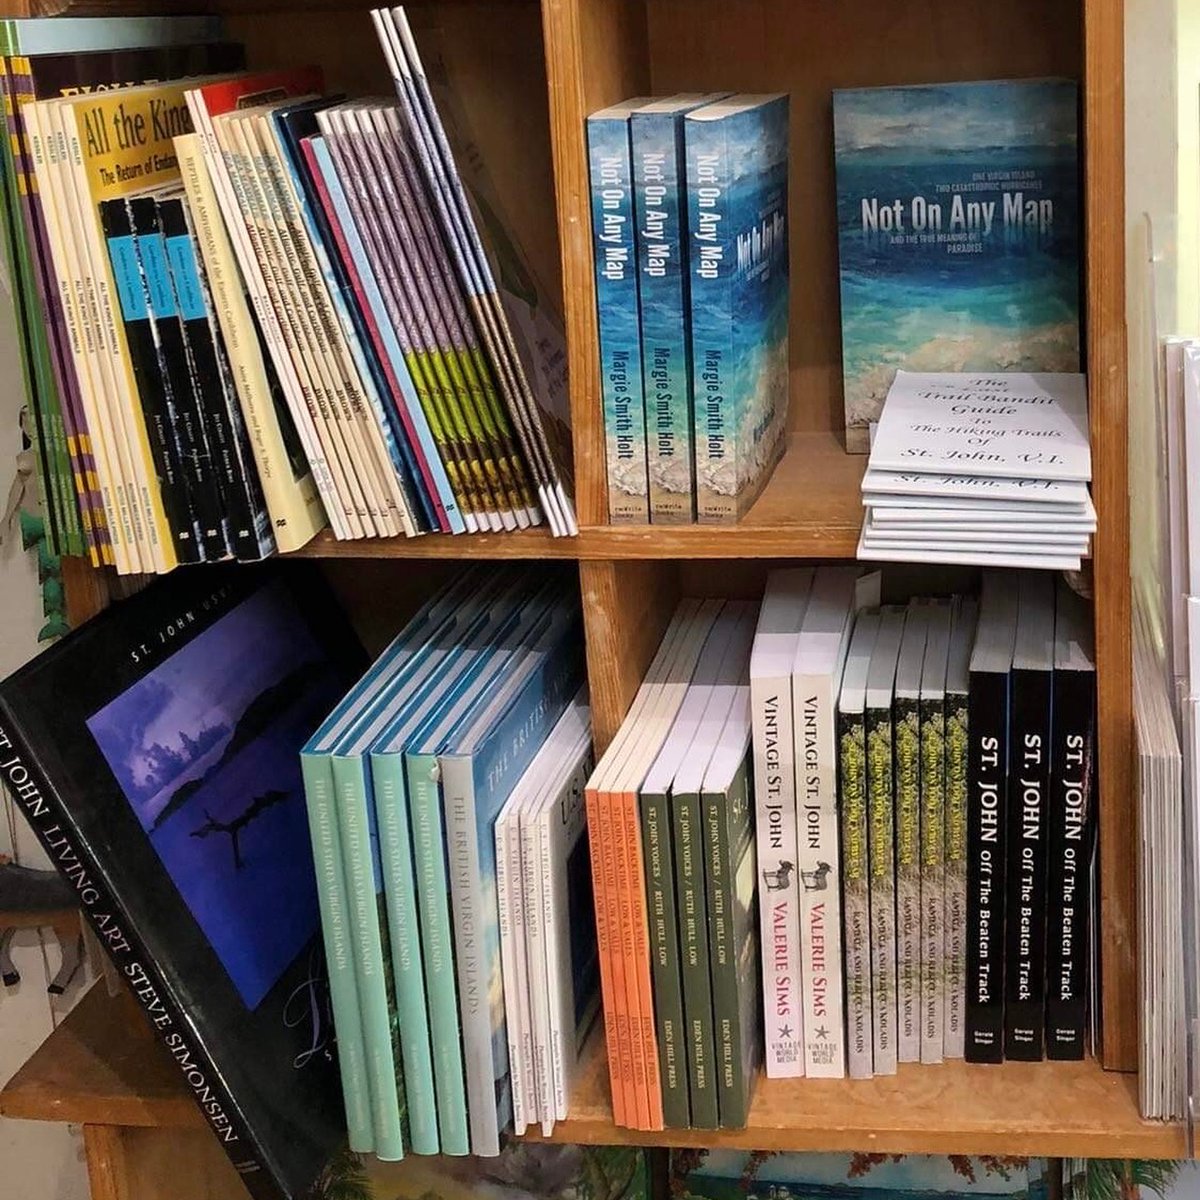 New on the shelves at St. John Spice in Cruz Bay: @MsMargarita1's new memoir Not On Any Map: One Virgin Island, Two Catastrophic Hurricanes, and the True Meaning of Paradise about #stjohn before and after hurricanes Irma and Maria. #readcaribbean #virginislands #visitusvi